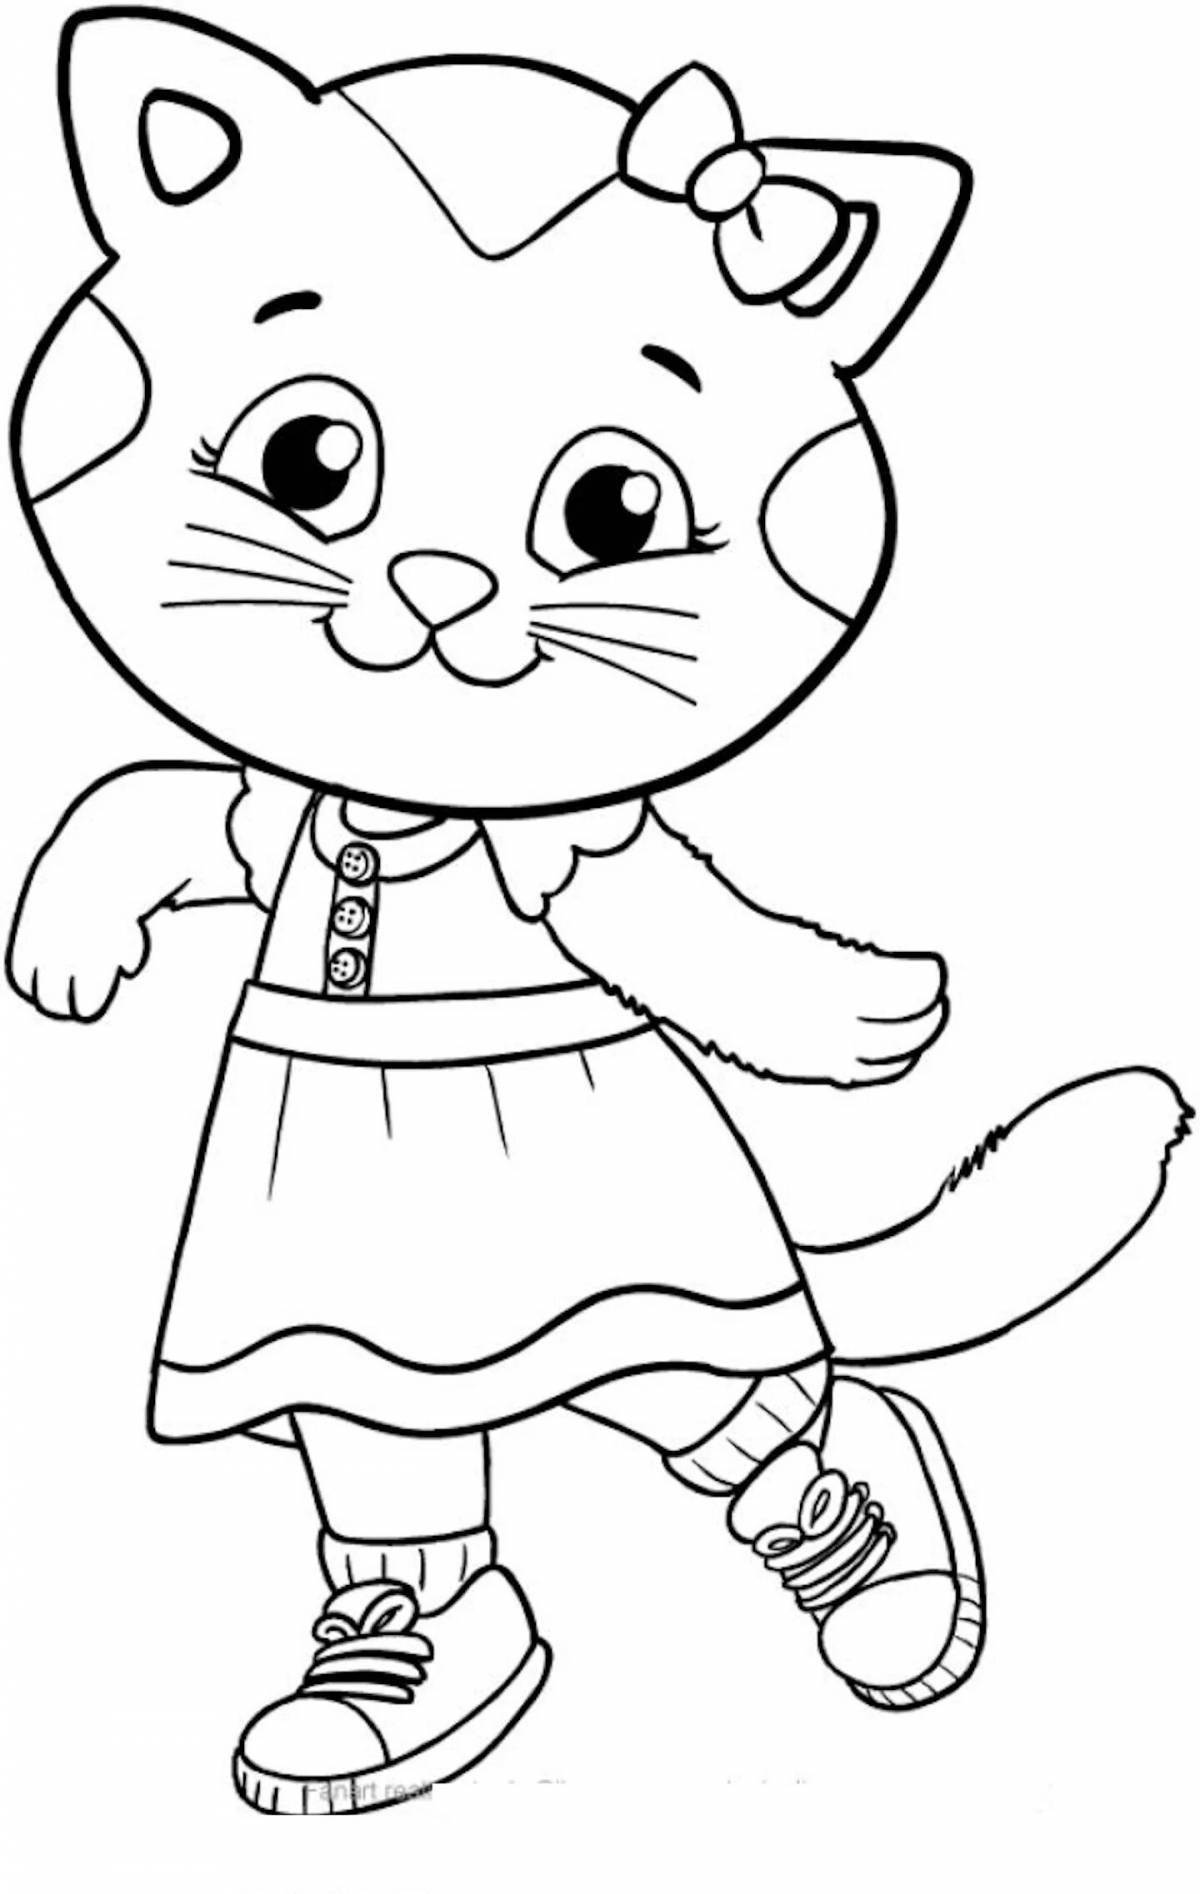 Charming my talking angela 2 coloring book